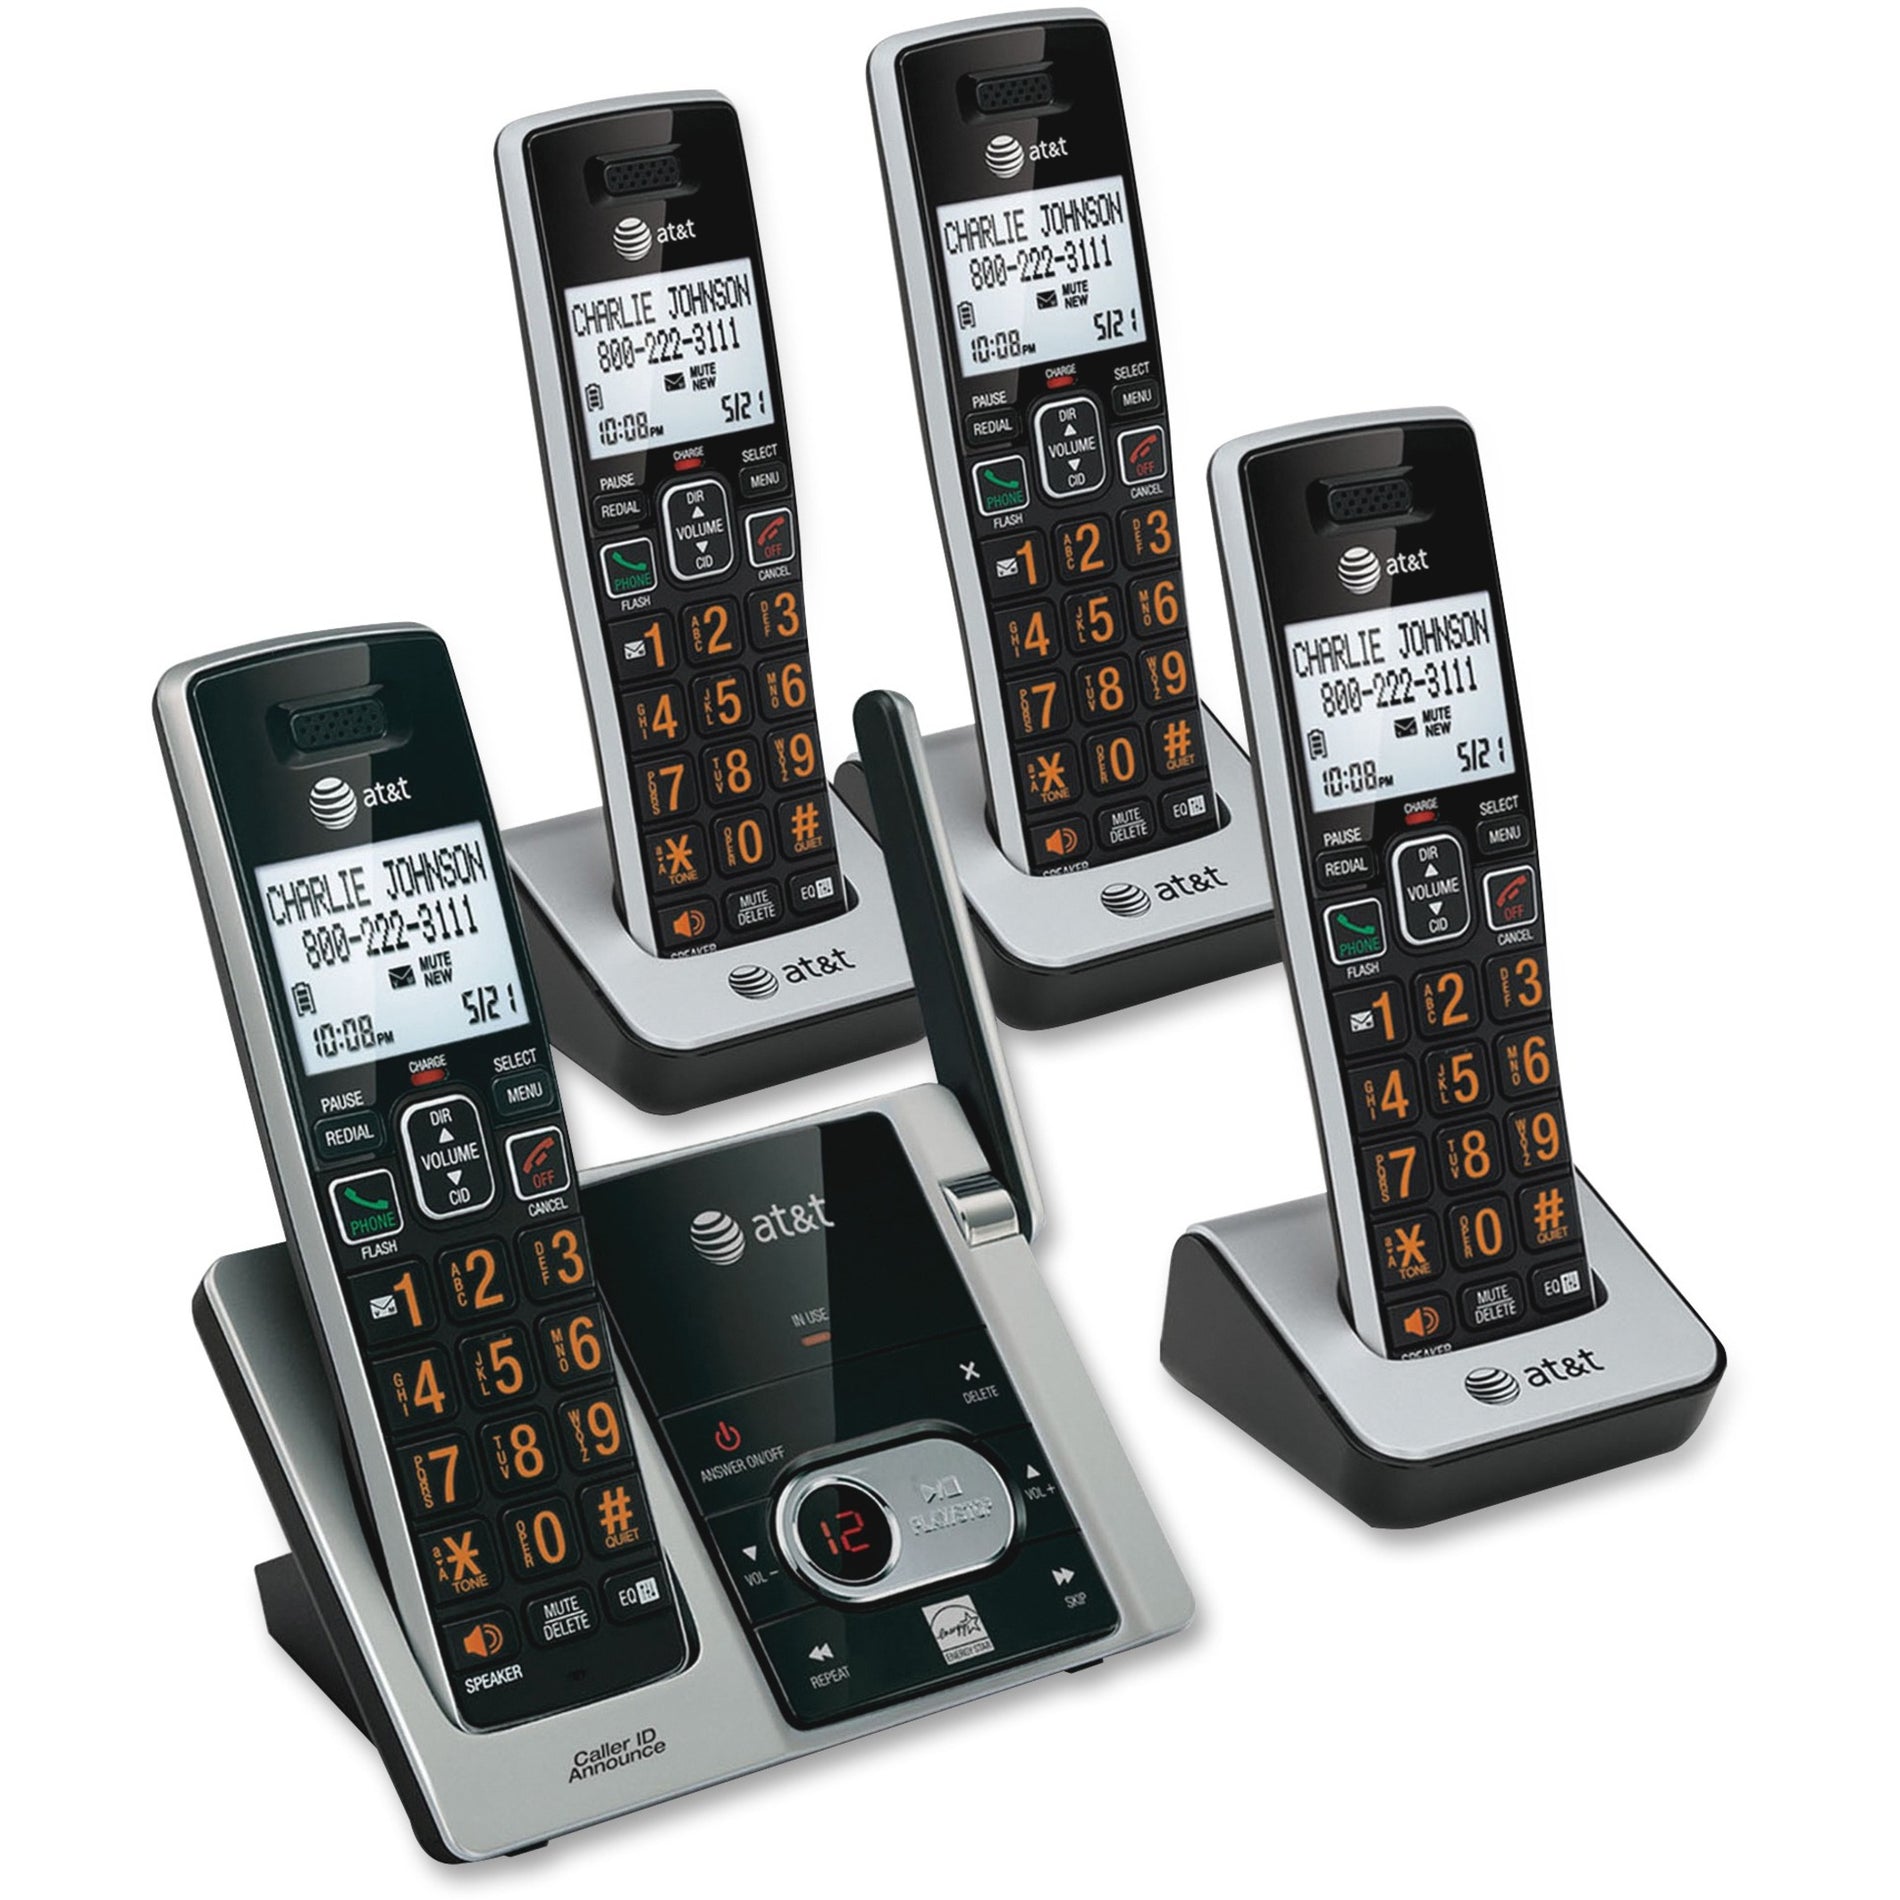 AT&T CL82413 4-Handset Cordless Answering System, DECT 6.0, Call Waiting, Speakerphone